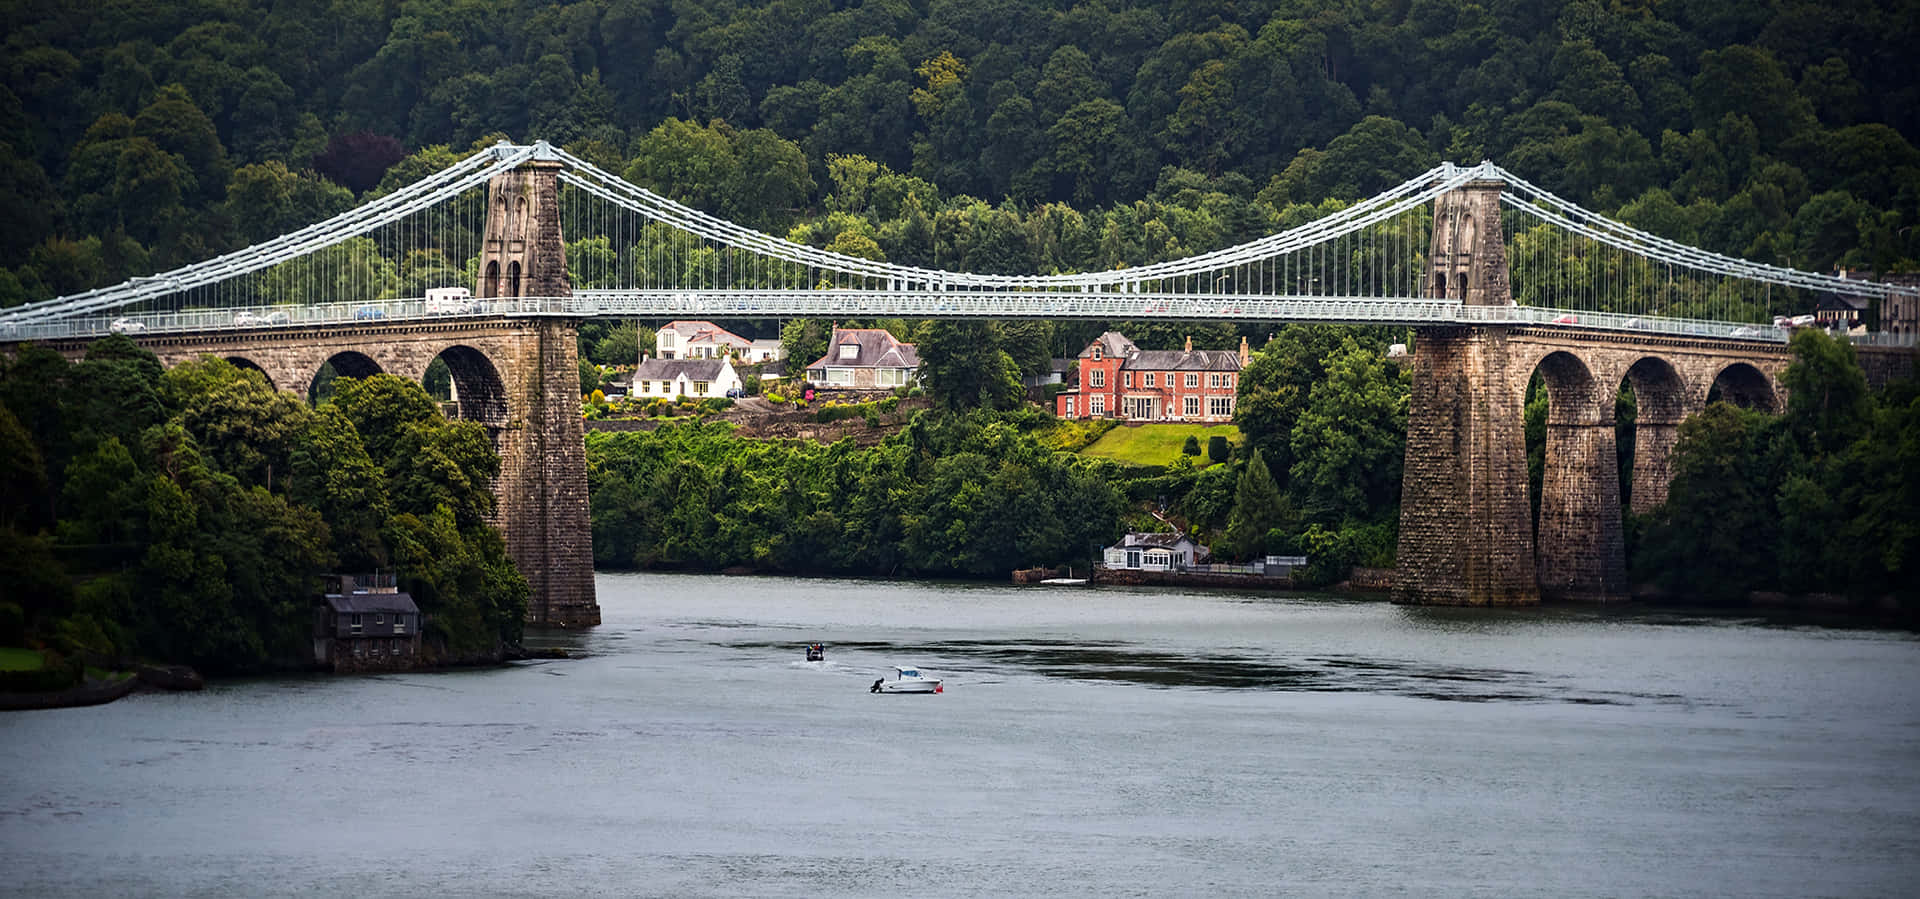 Caption: The Vibrant City Of Bangor, United Kingdom Enriched With Cultural Heritage And Stunning Architecture Wallpaper